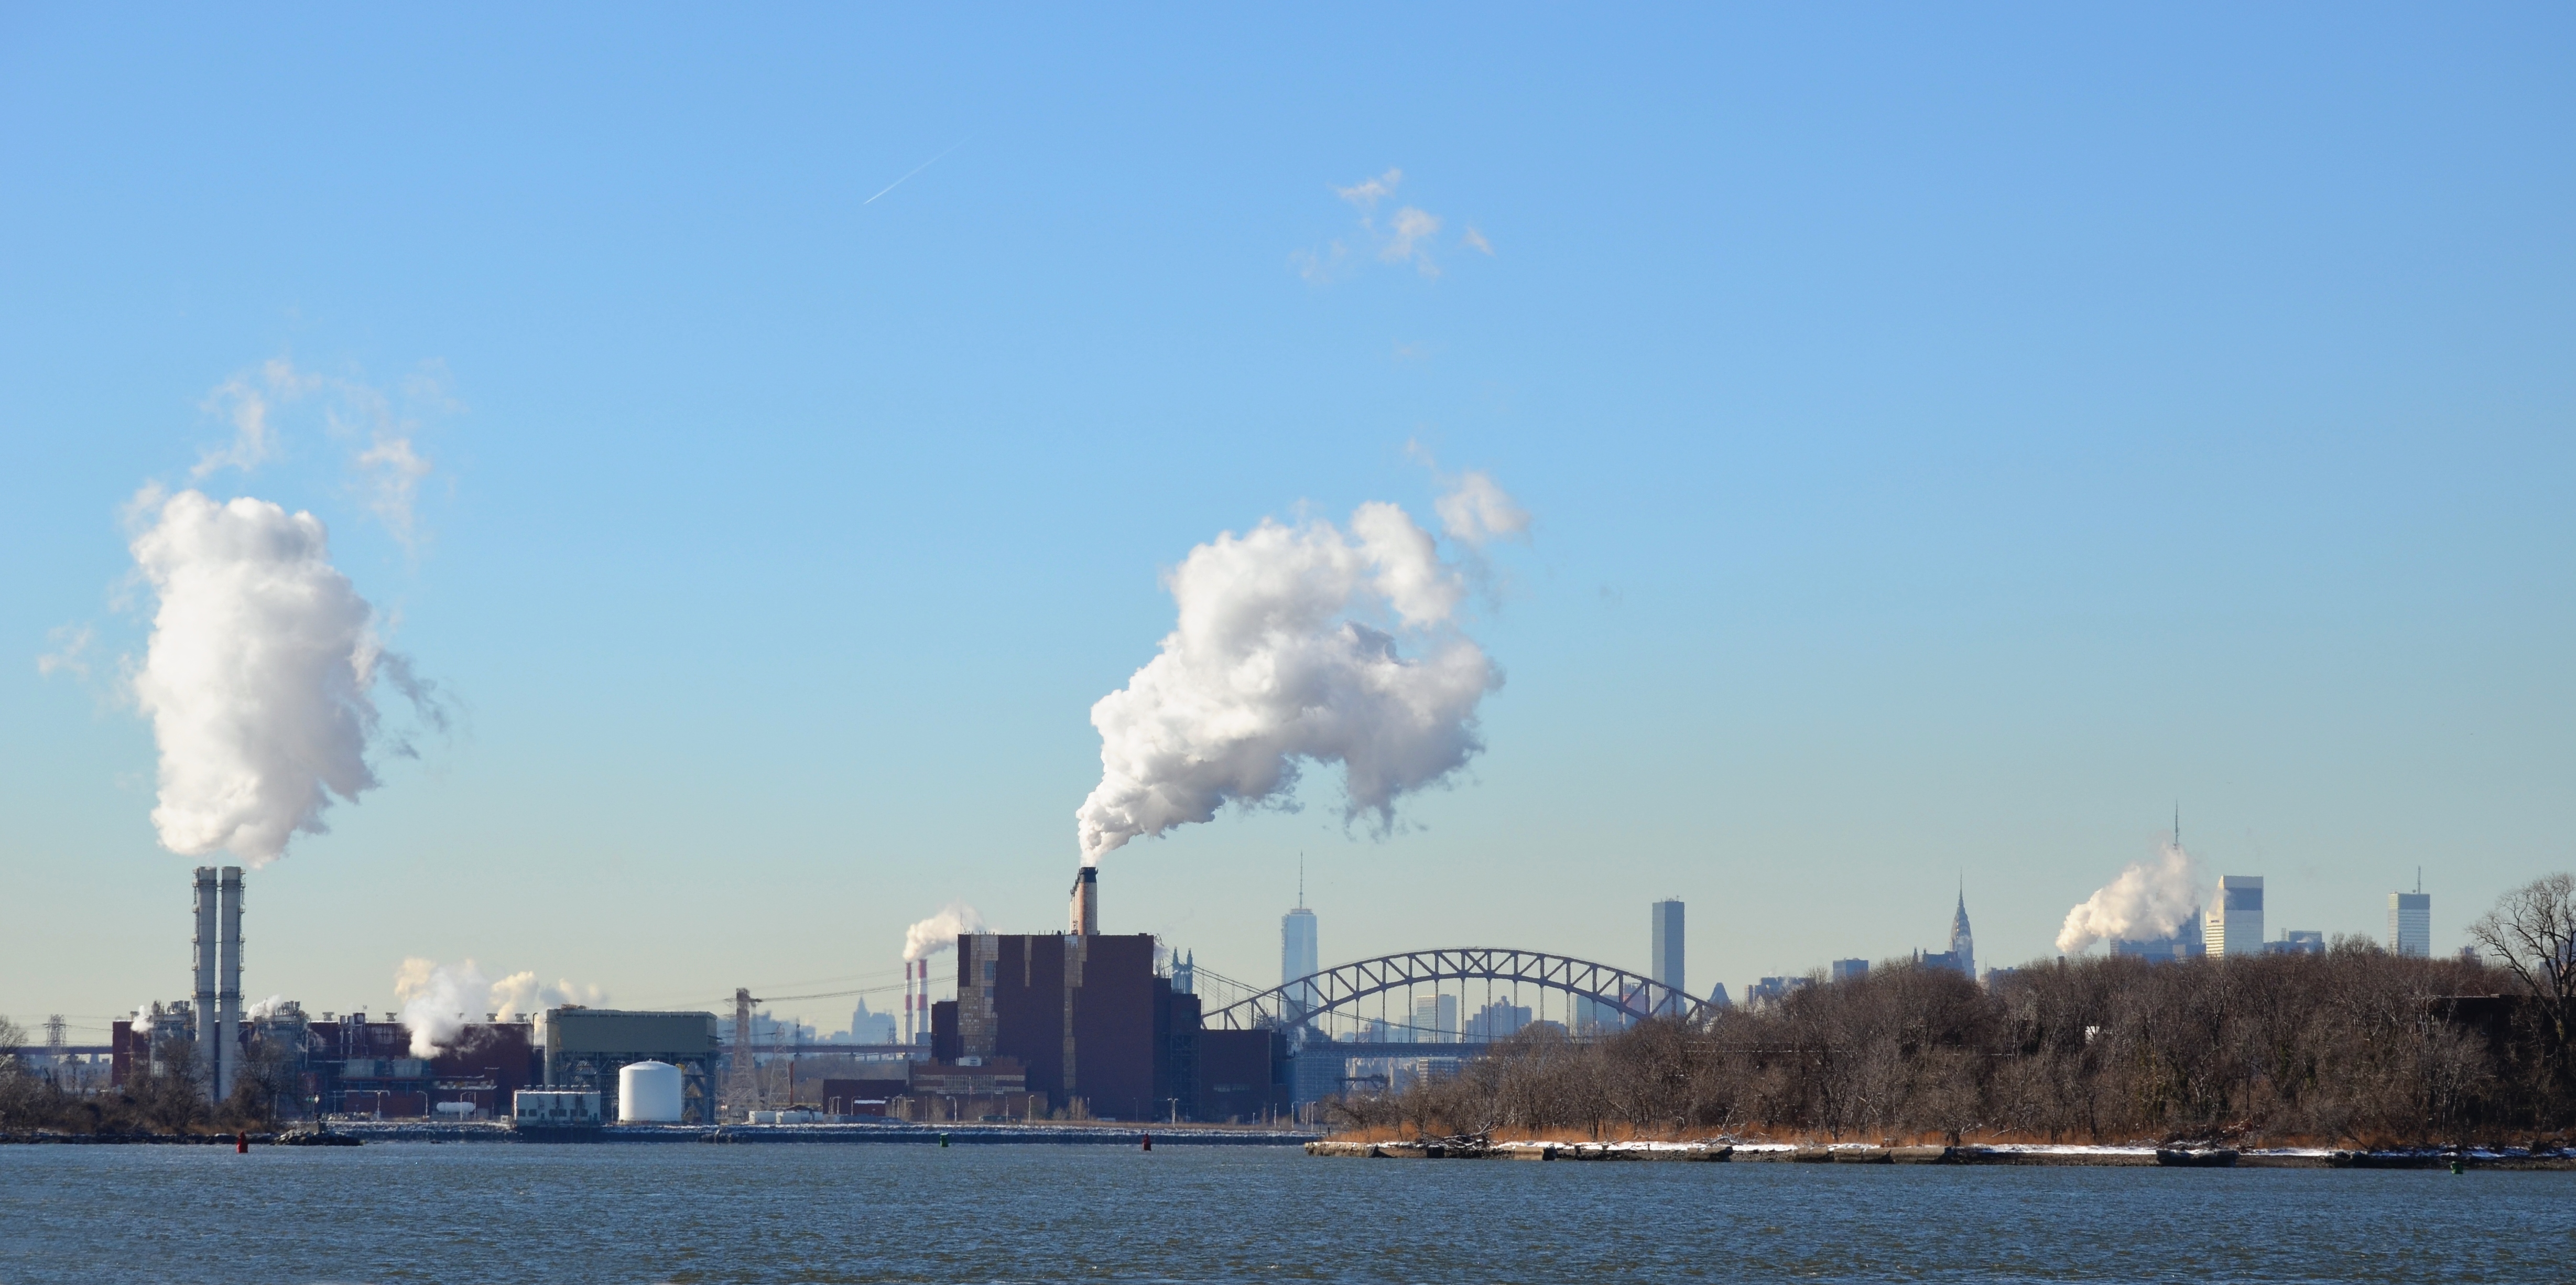 view of Hell Gate bridge and Astoria generating station